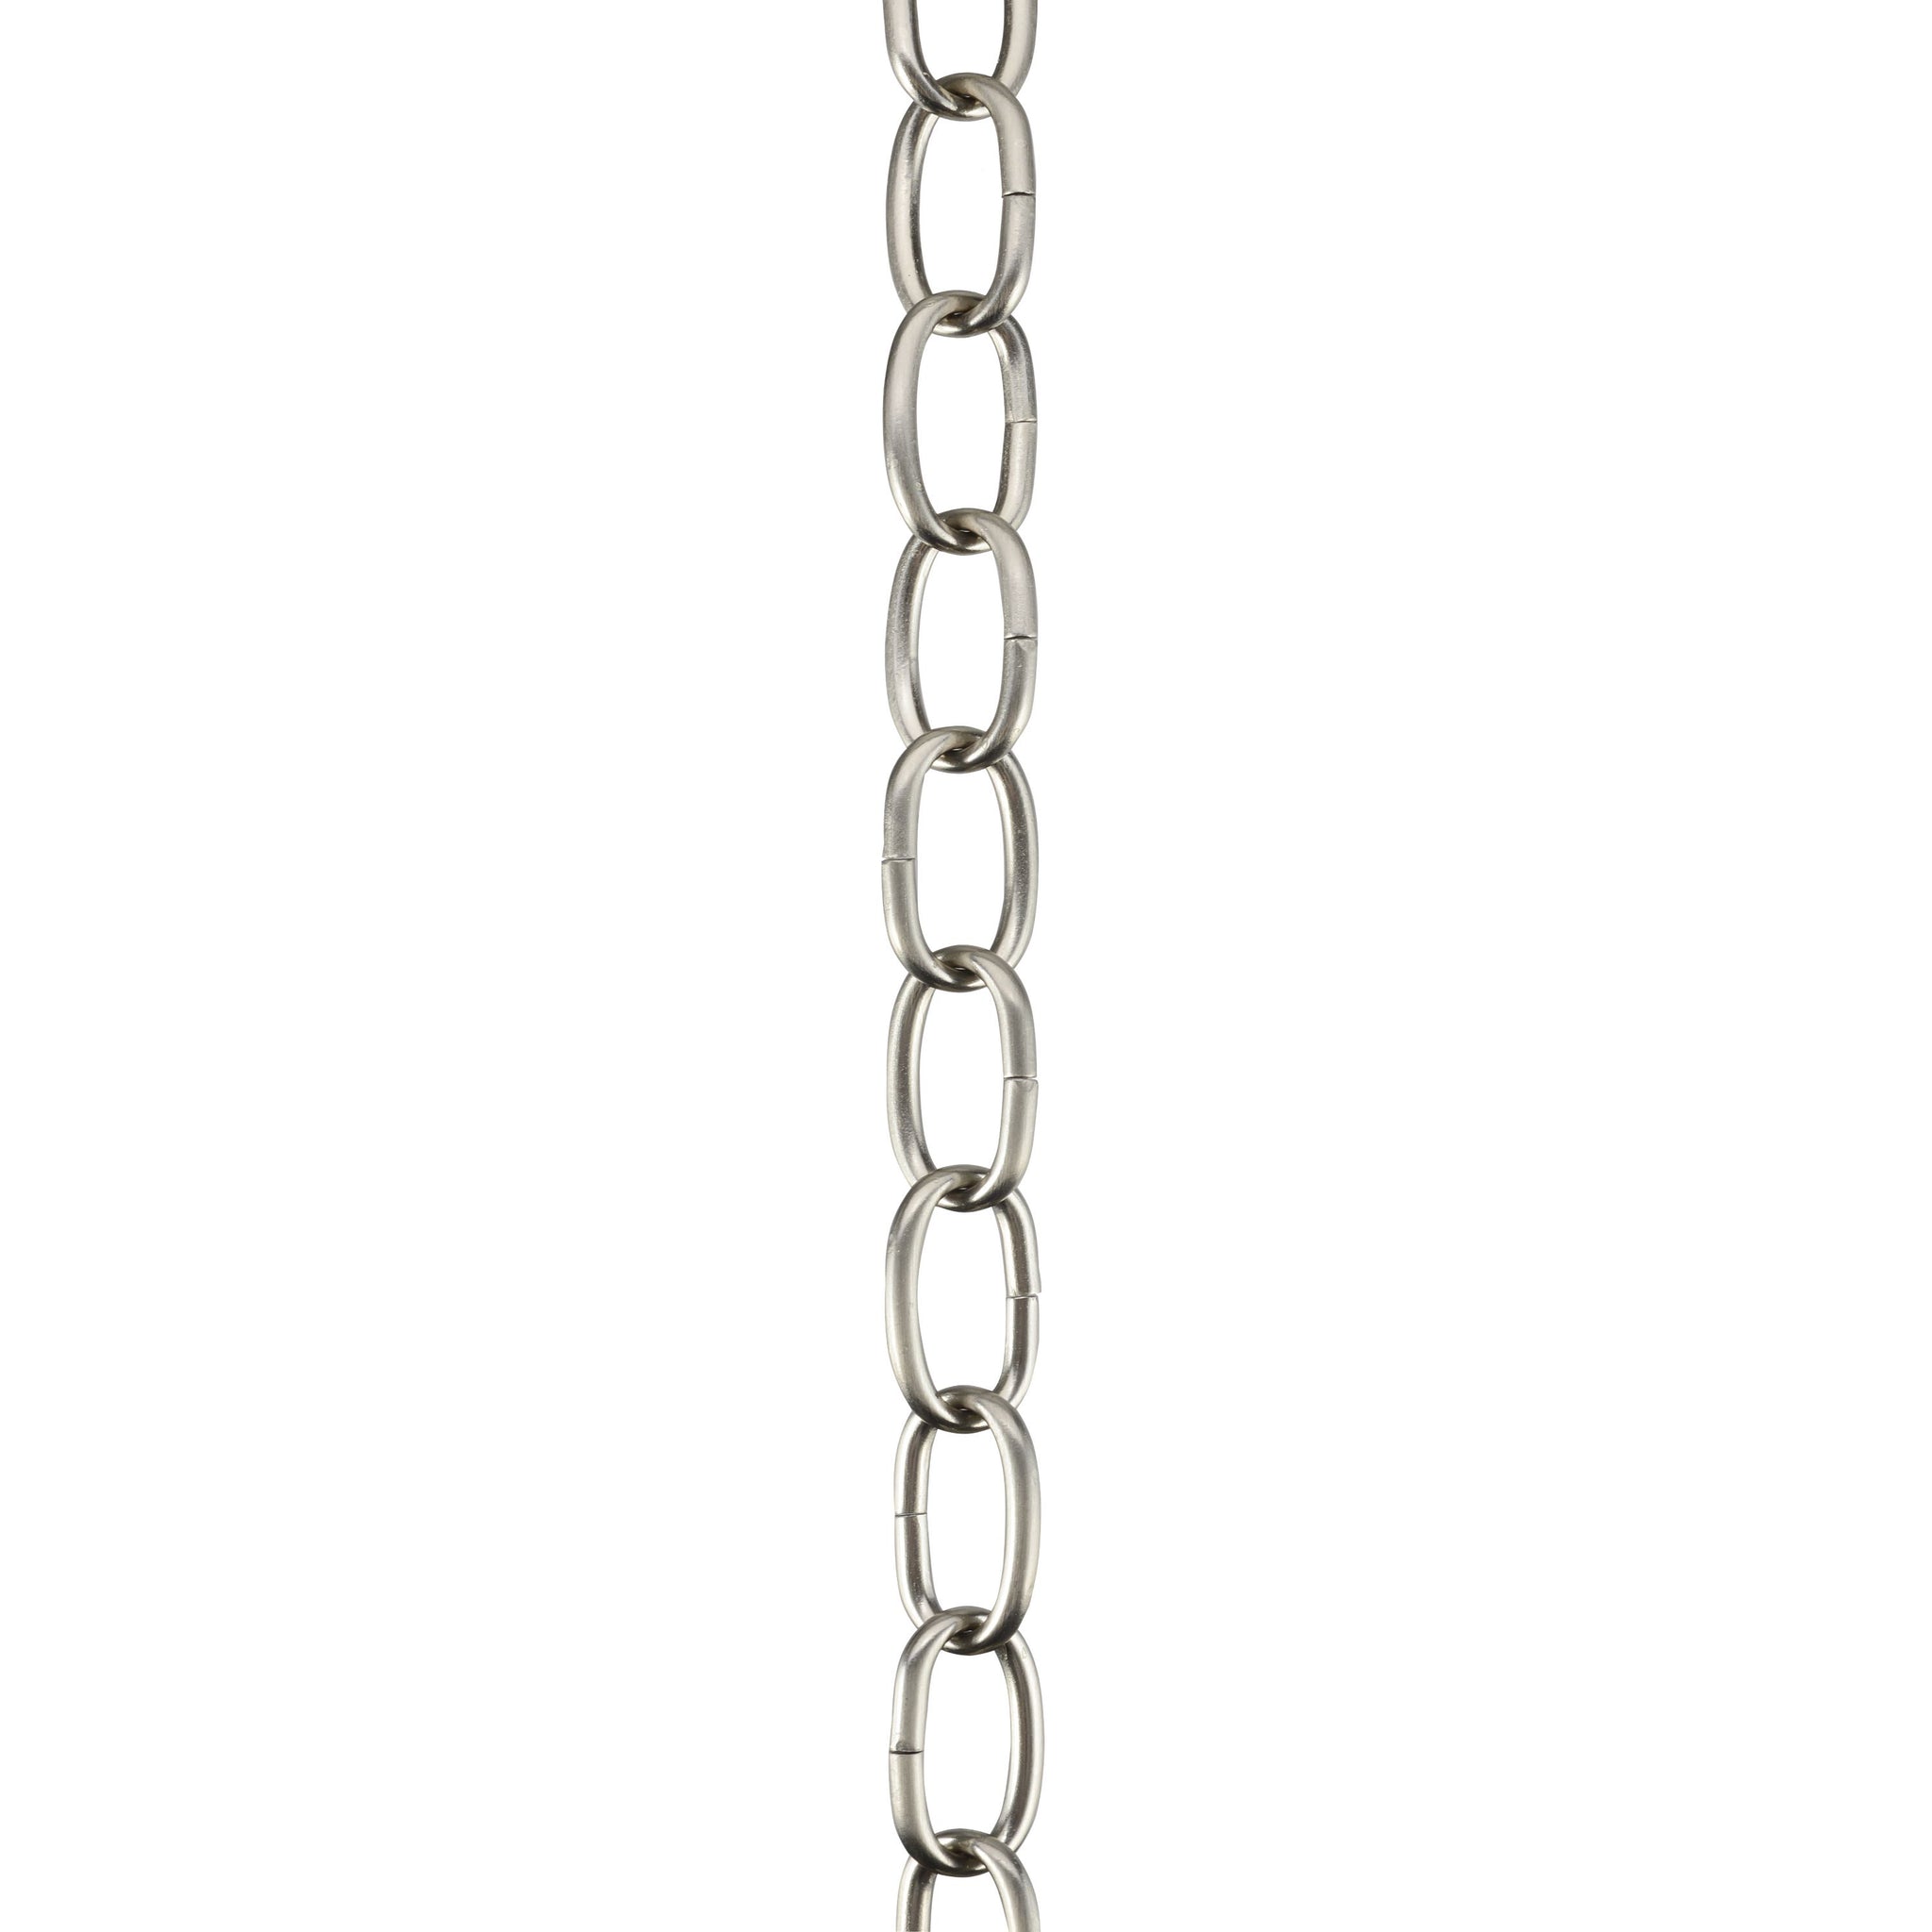 Aspen Creative 21106-31,Steel 10 Feet Heavy Duty Chain for Hanging Up Maximum Weight 50 Pounds-Lighting Fixture/Swag Light/Plant in Brushed Nickel.9